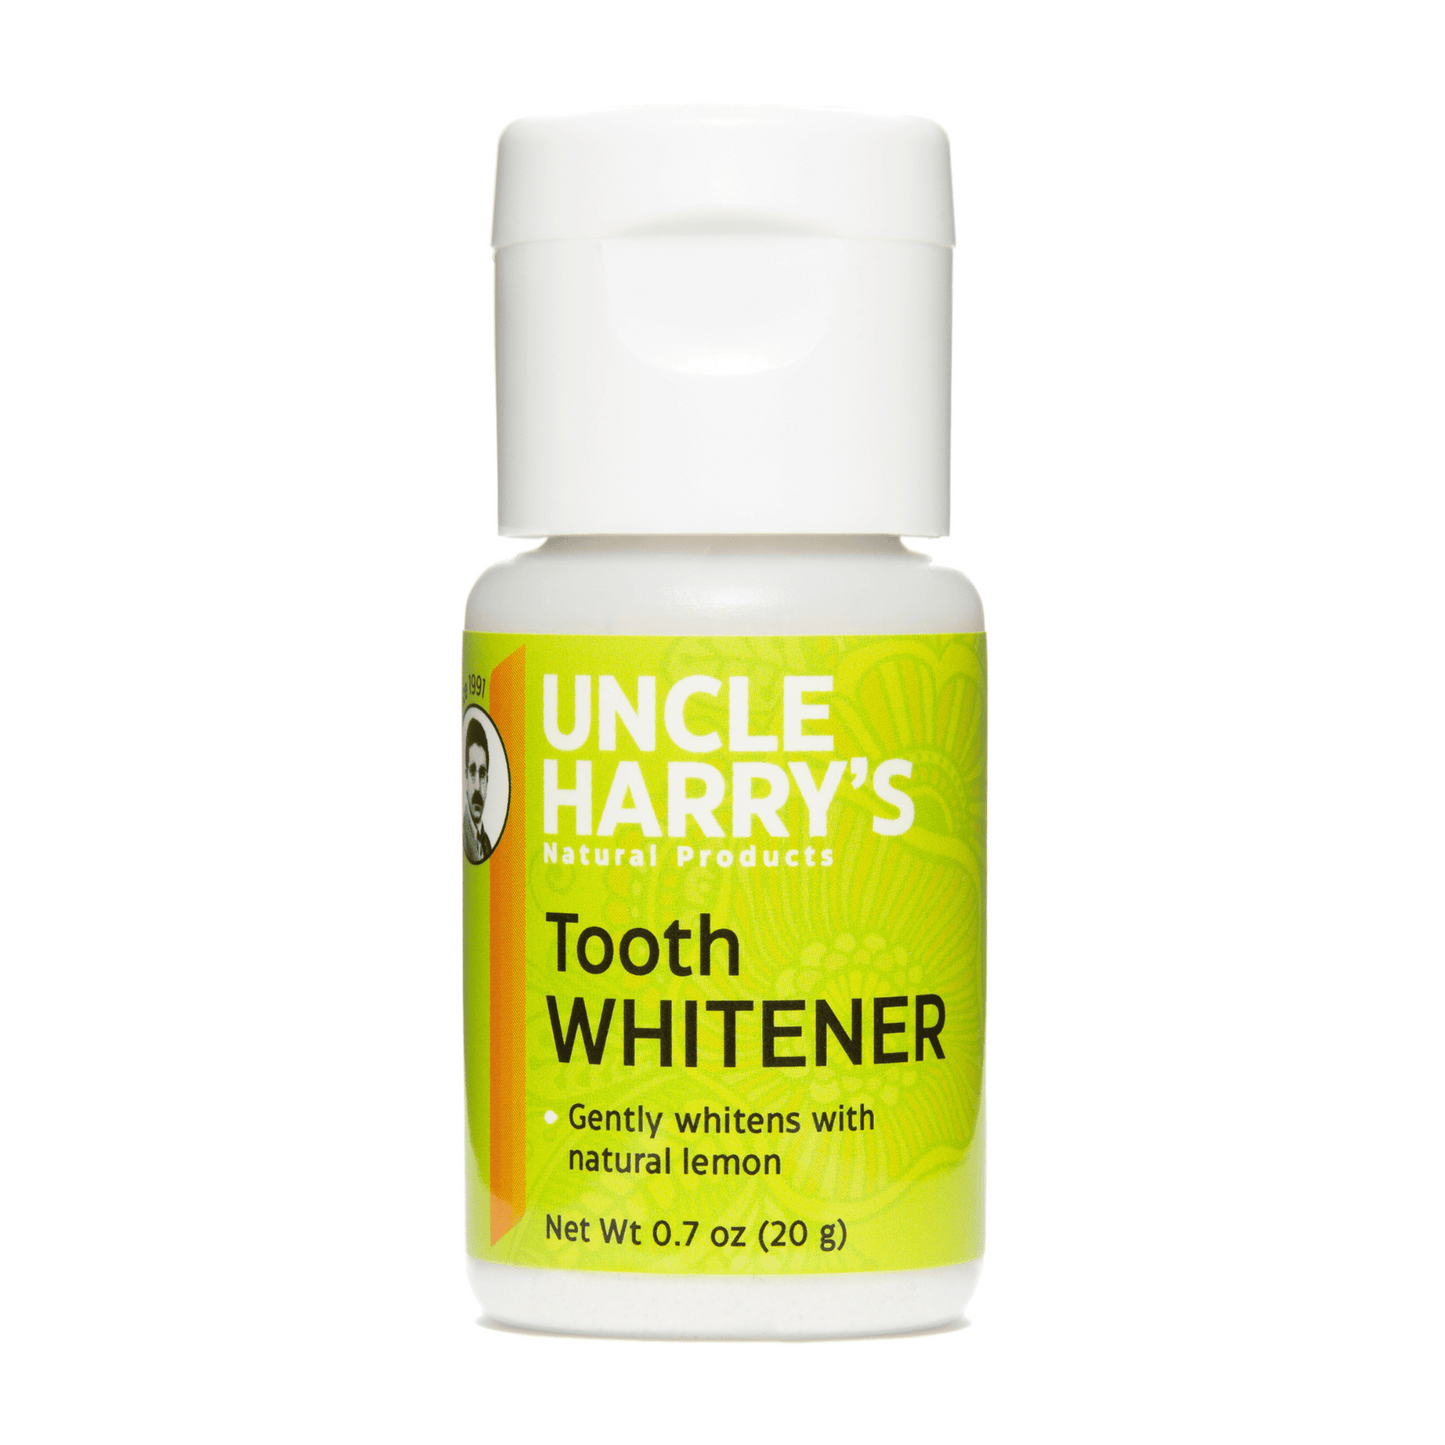 Primary Image of Tooth Whitener Powder